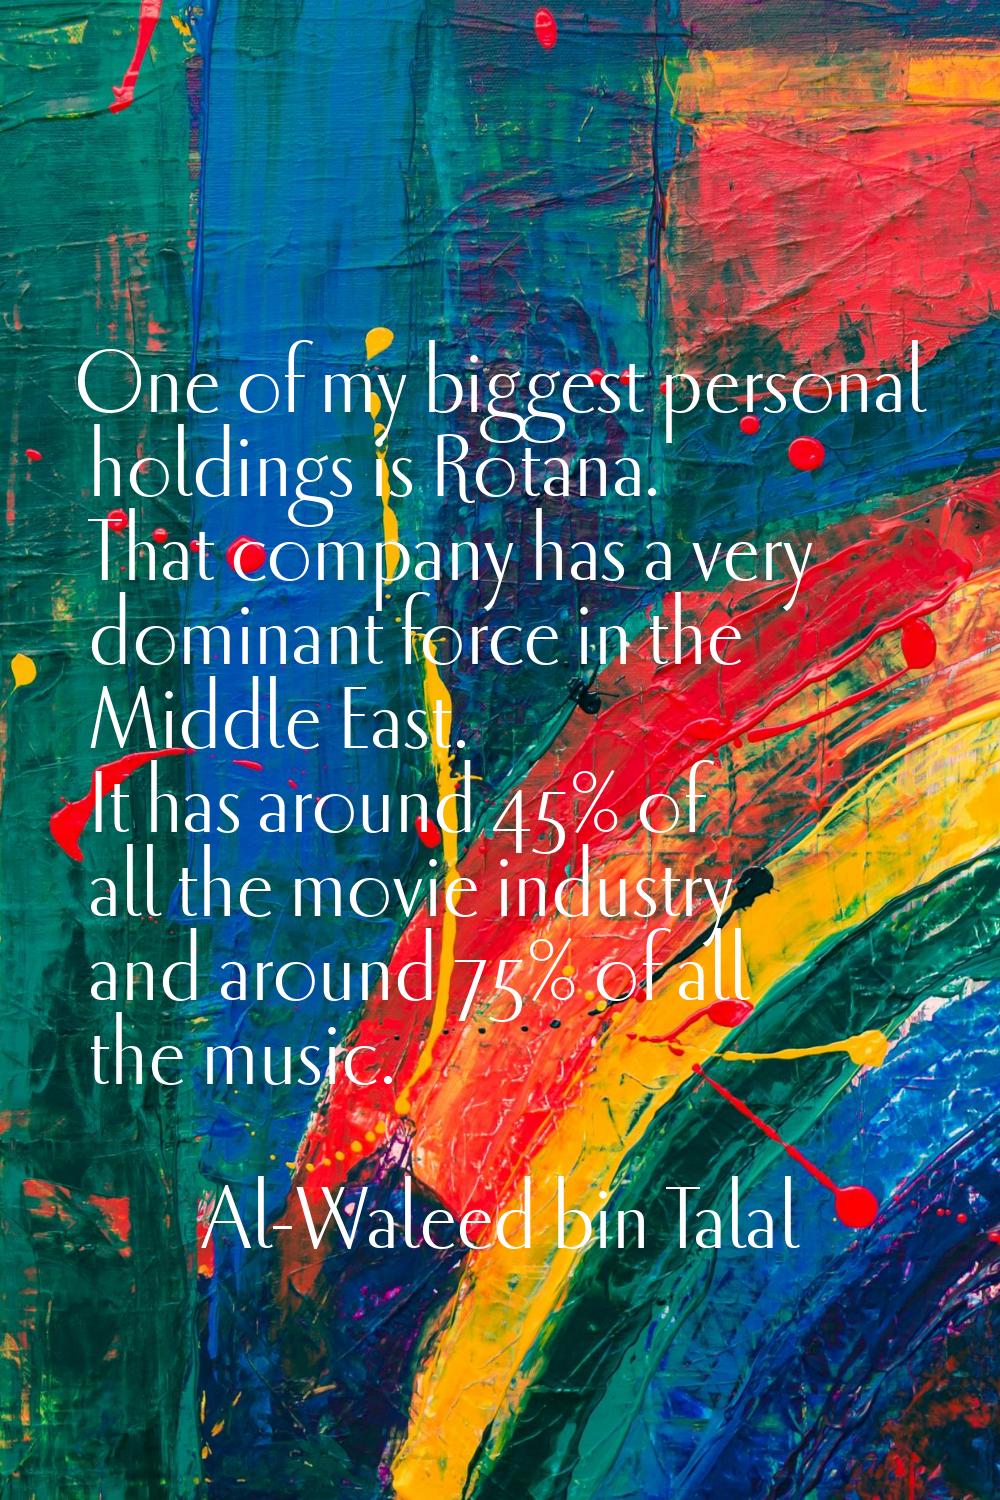 One of my biggest personal holdings is Rotana. That company has a very dominant force in the Middle